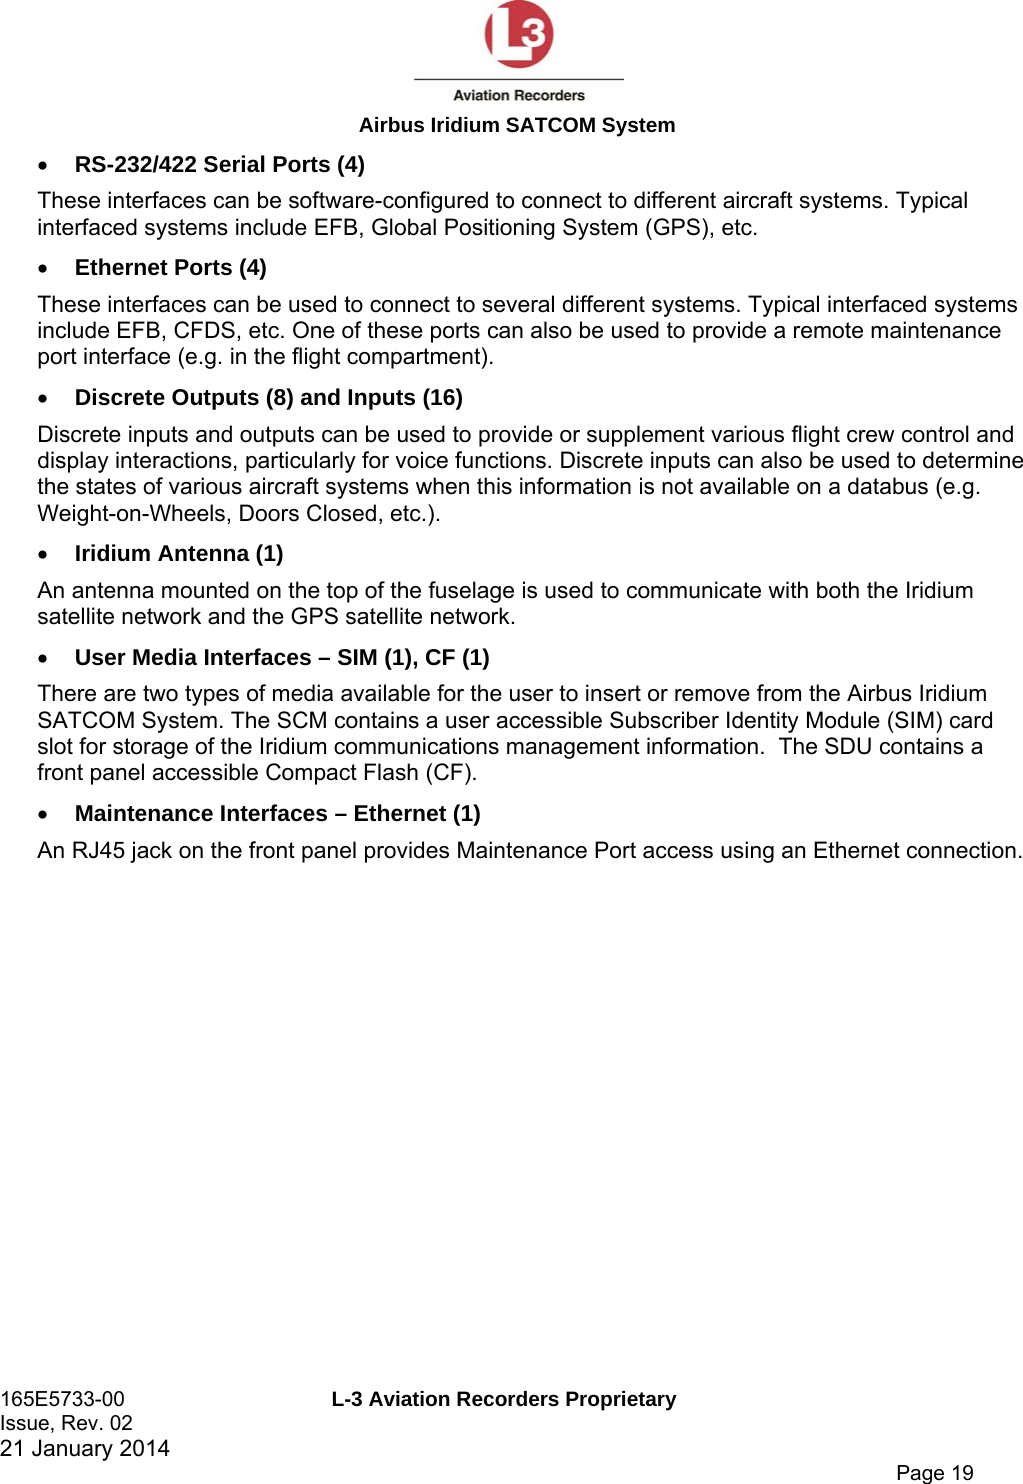  Airbus Iridium SATCOM System 165E5733-00  L-3 Aviation Recorders Proprietary Issue, Rev. 02   21 January 2014      Page 19  RS-232/422 Serial Ports (4) These interfaces can be software-configured to connect to different aircraft systems. Typical interfaced systems include EFB, Global Positioning System (GPS), etc.  Ethernet Ports (4) These interfaces can be used to connect to several different systems. Typical interfaced systems include EFB, CFDS, etc. One of these ports can also be used to provide a remote maintenance port interface (e.g. in the flight compartment).  Discrete Outputs (8) and Inputs (16) Discrete inputs and outputs can be used to provide or supplement various flight crew control and display interactions, particularly for voice functions. Discrete inputs can also be used to determine the states of various aircraft systems when this information is not available on a databus (e.g. Weight-on-Wheels, Doors Closed, etc.).  Iridium Antenna (1) An antenna mounted on the top of the fuselage is used to communicate with both the Iridium satellite network and the GPS satellite network.  User Media Interfaces – SIM (1), CF (1) There are two types of media available for the user to insert or remove from the Airbus Iridium SATCOM System. The SCM contains a user accessible Subscriber Identity Module (SIM) card slot for storage of the Iridium communications management information.  The SDU contains a front panel accessible Compact Flash (CF).   Maintenance Interfaces – Ethernet (1) An RJ45 jack on the front panel provides Maintenance Port access using an Ethernet connection. 